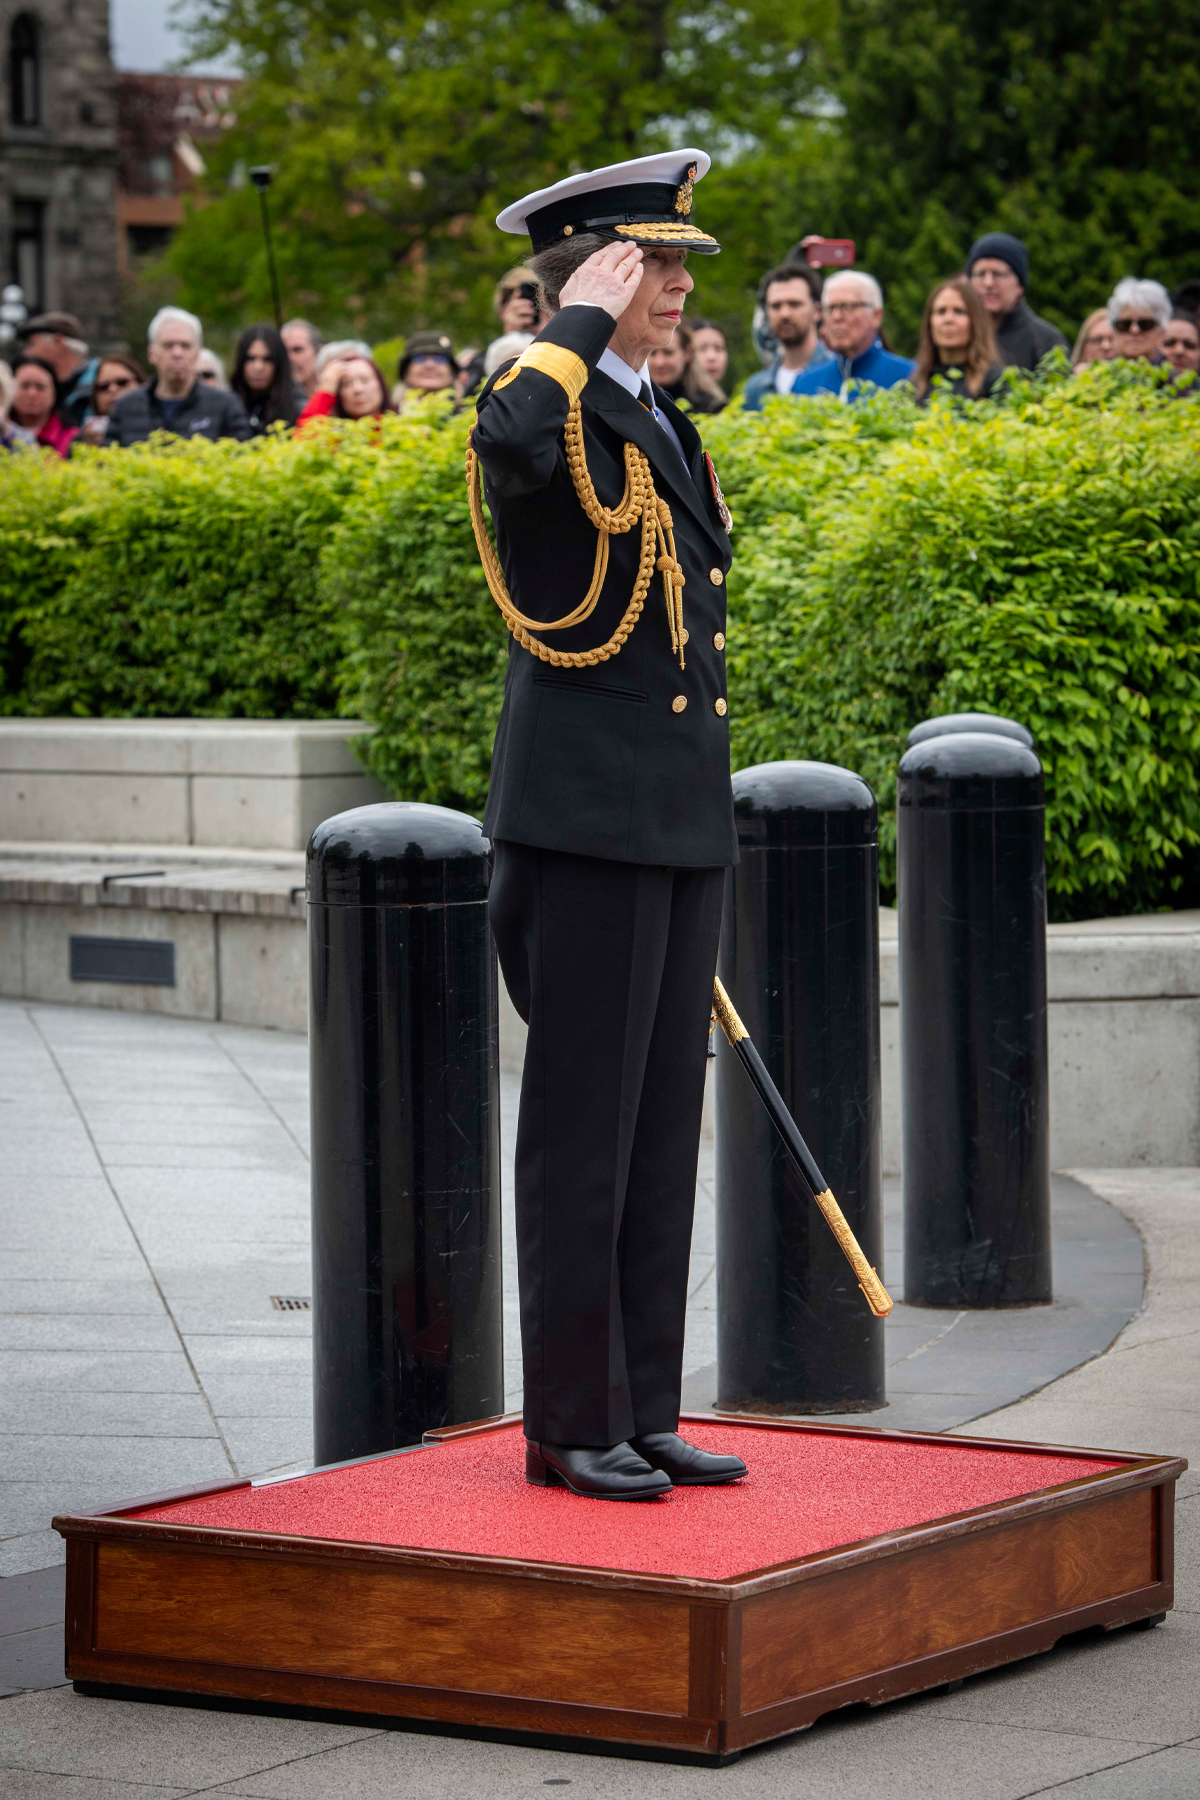 Her Royal Highness Princess Anne salutes the Battle of the Atlantic parade at the Victoria Cenotaph. Photo: Cpl Tristan Walach, MARPAC Imaging Services.